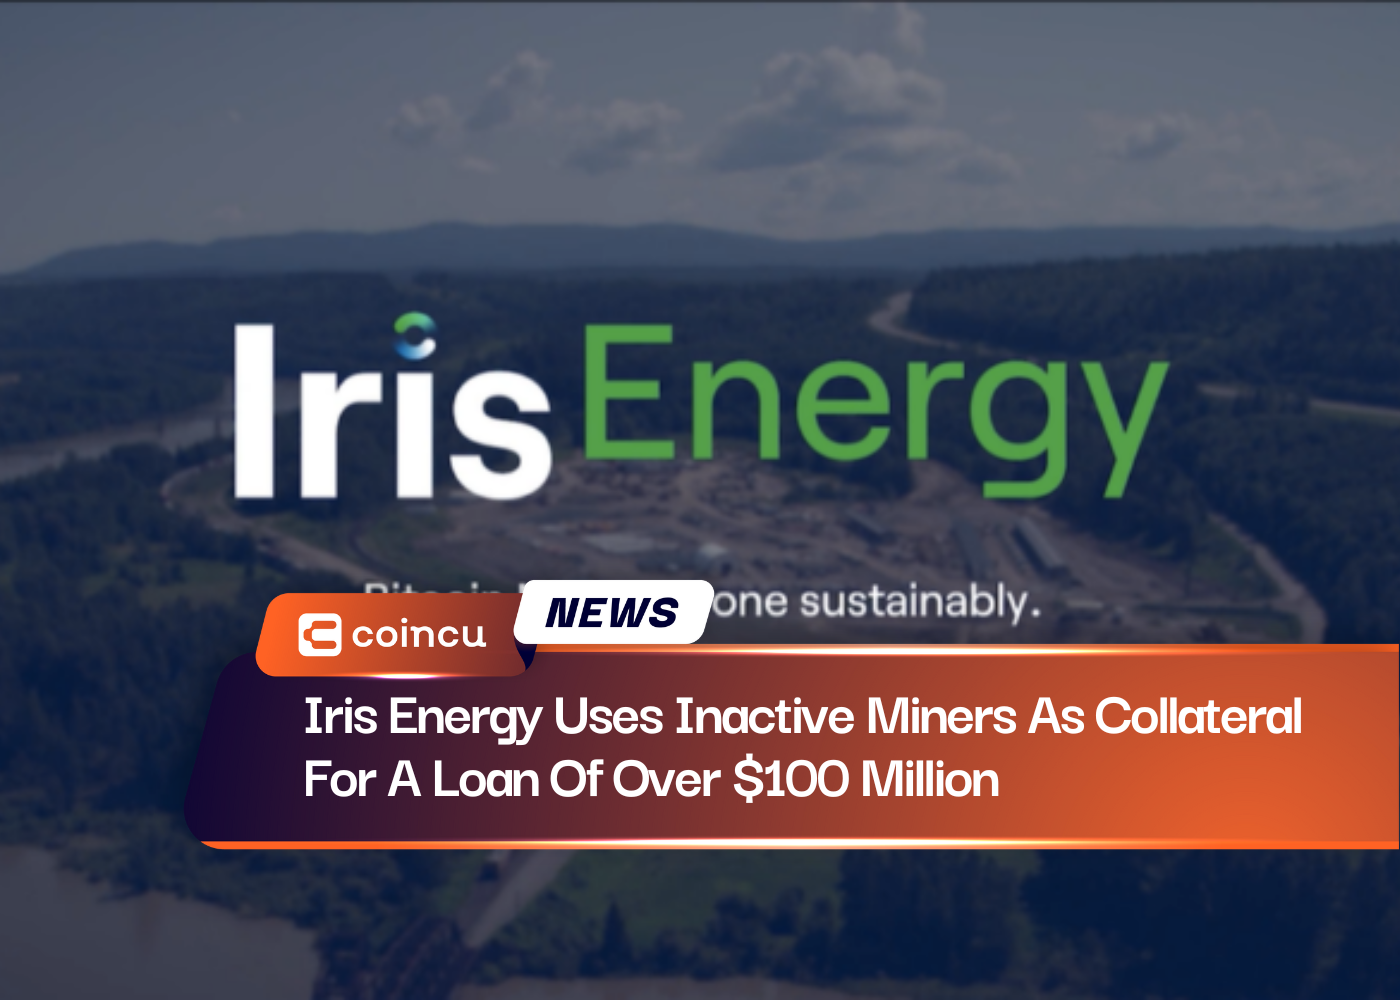 Iris Energy Uses Inactive Miners As Collateral For A Loan Of Over $100 Million